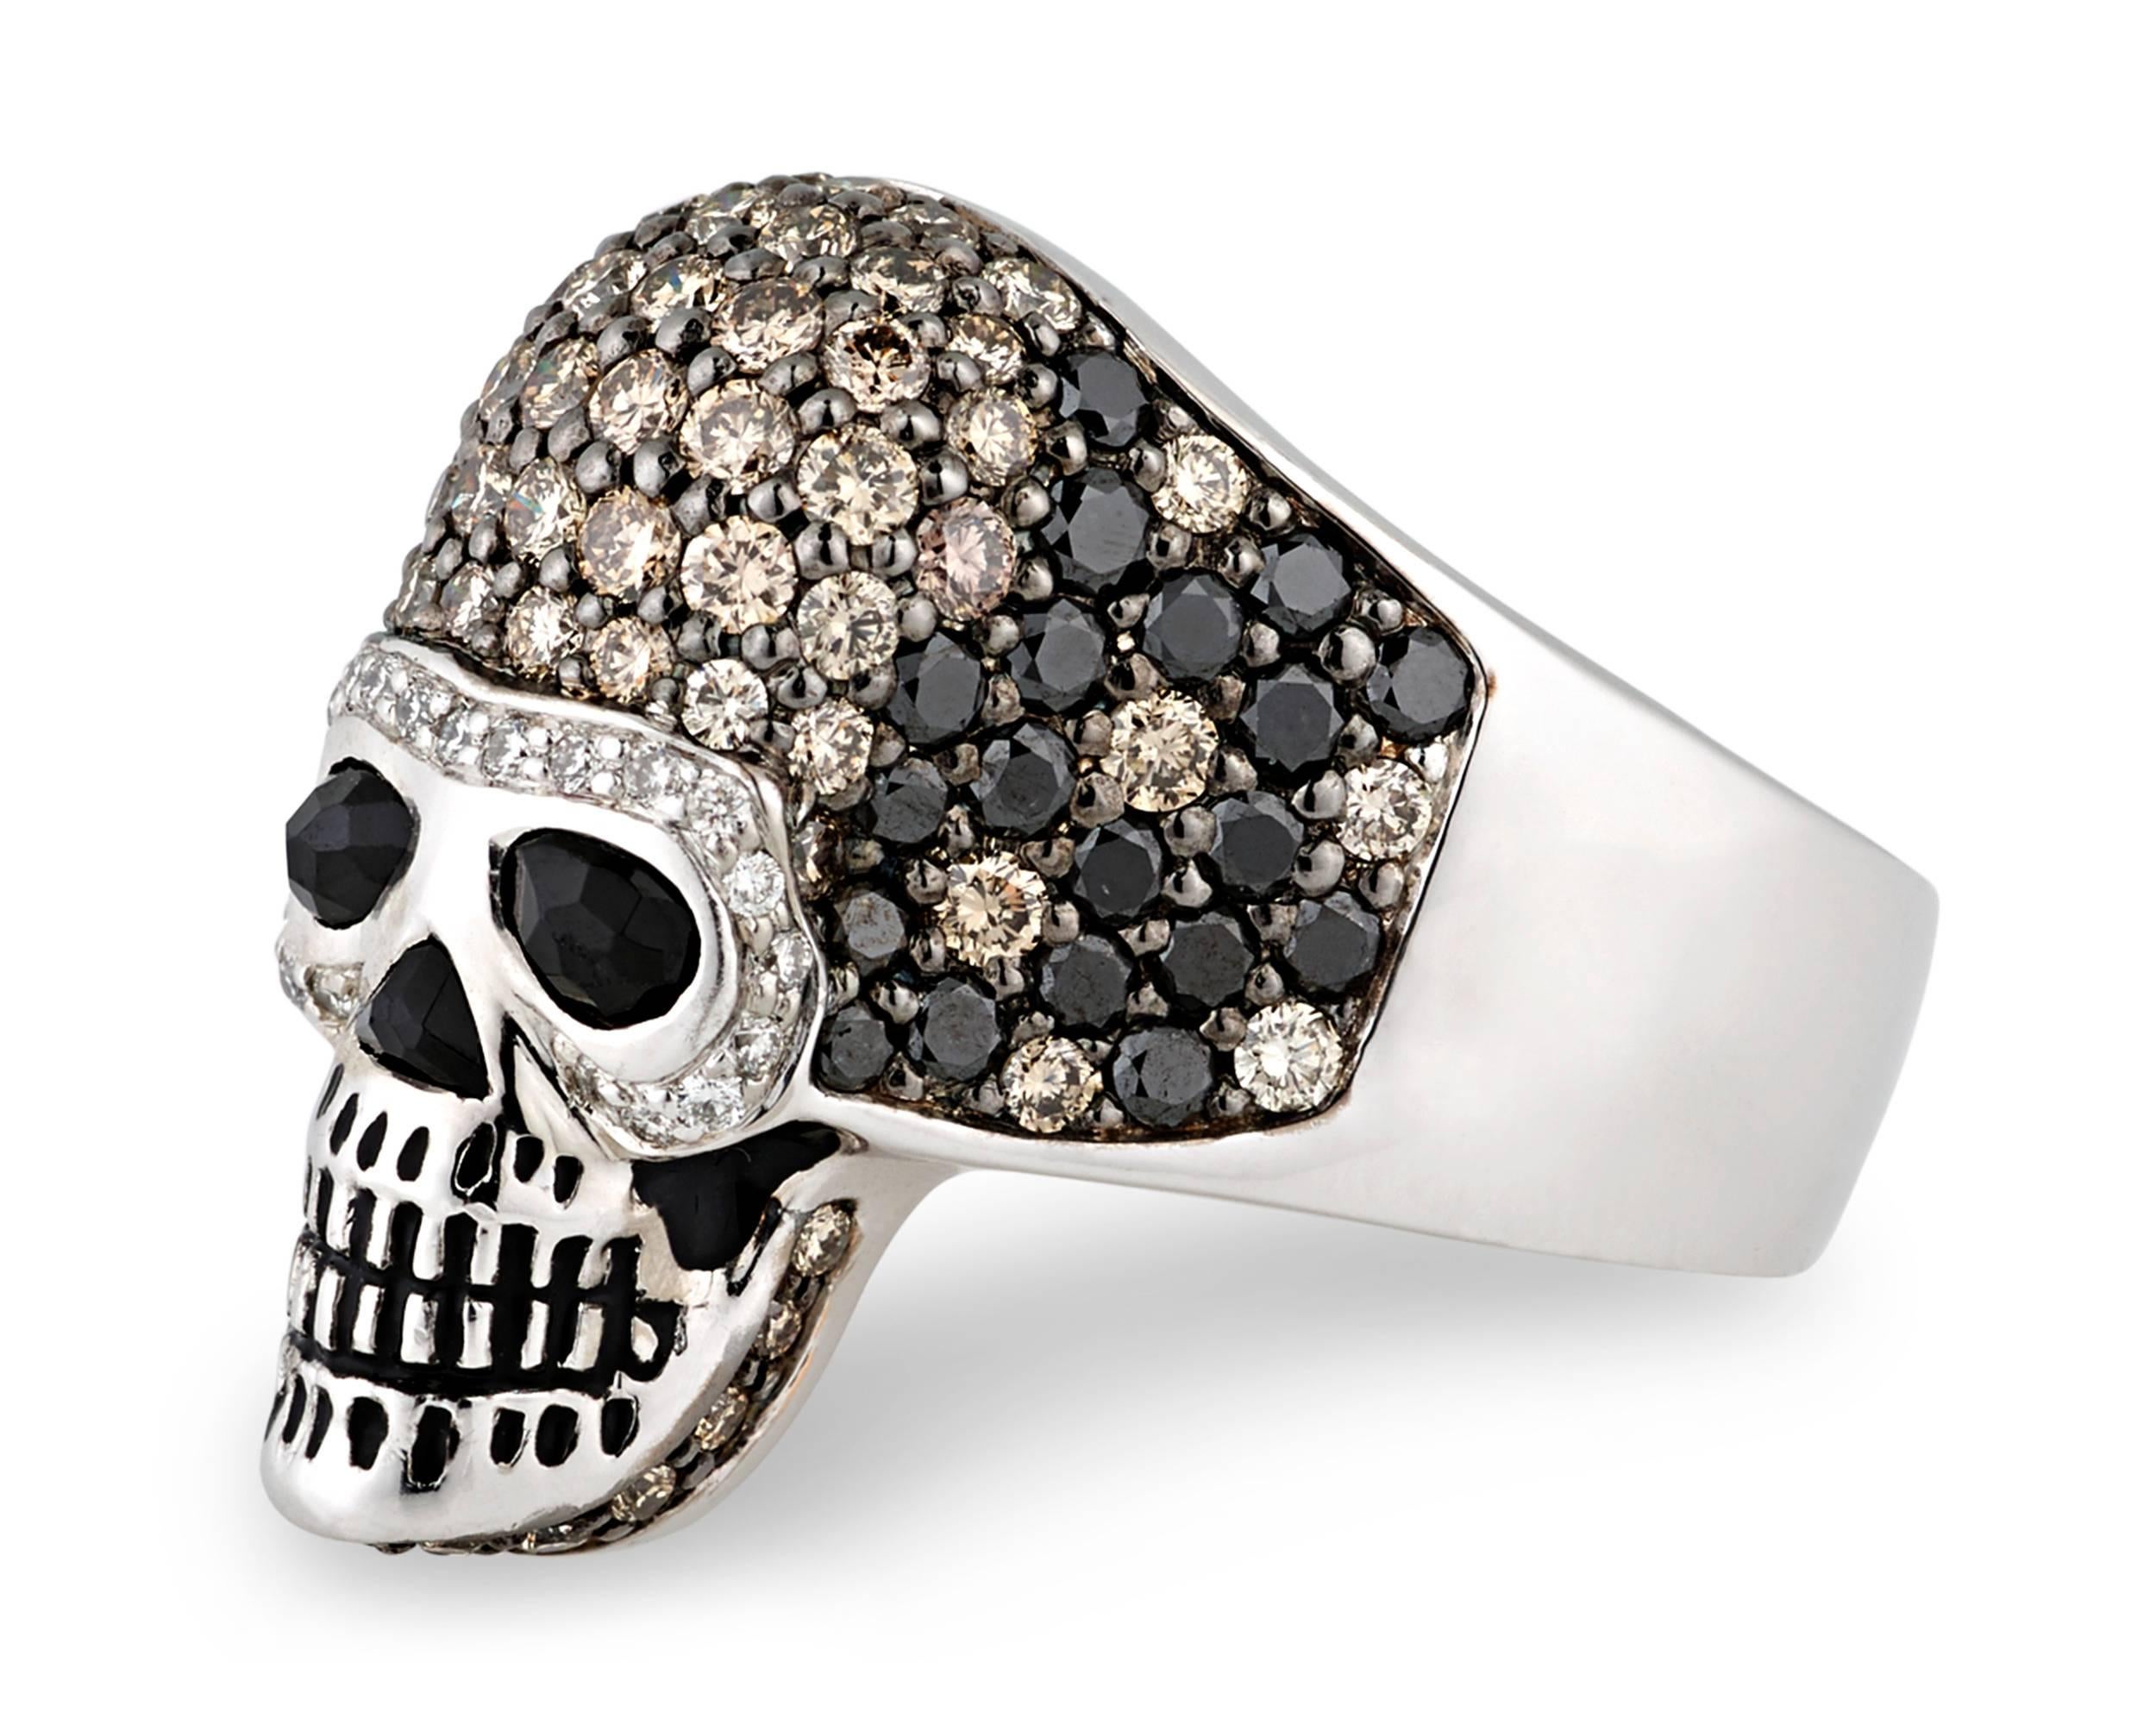 Scintillating diamonds dazzle in this entrancing and edgy skull ring. White diamonds surround the macabre figure's dark spinel eyes, while 1.50 total carats of brown diamonds and 1.29 total carats of black diamonds add bold contrast to the skull's